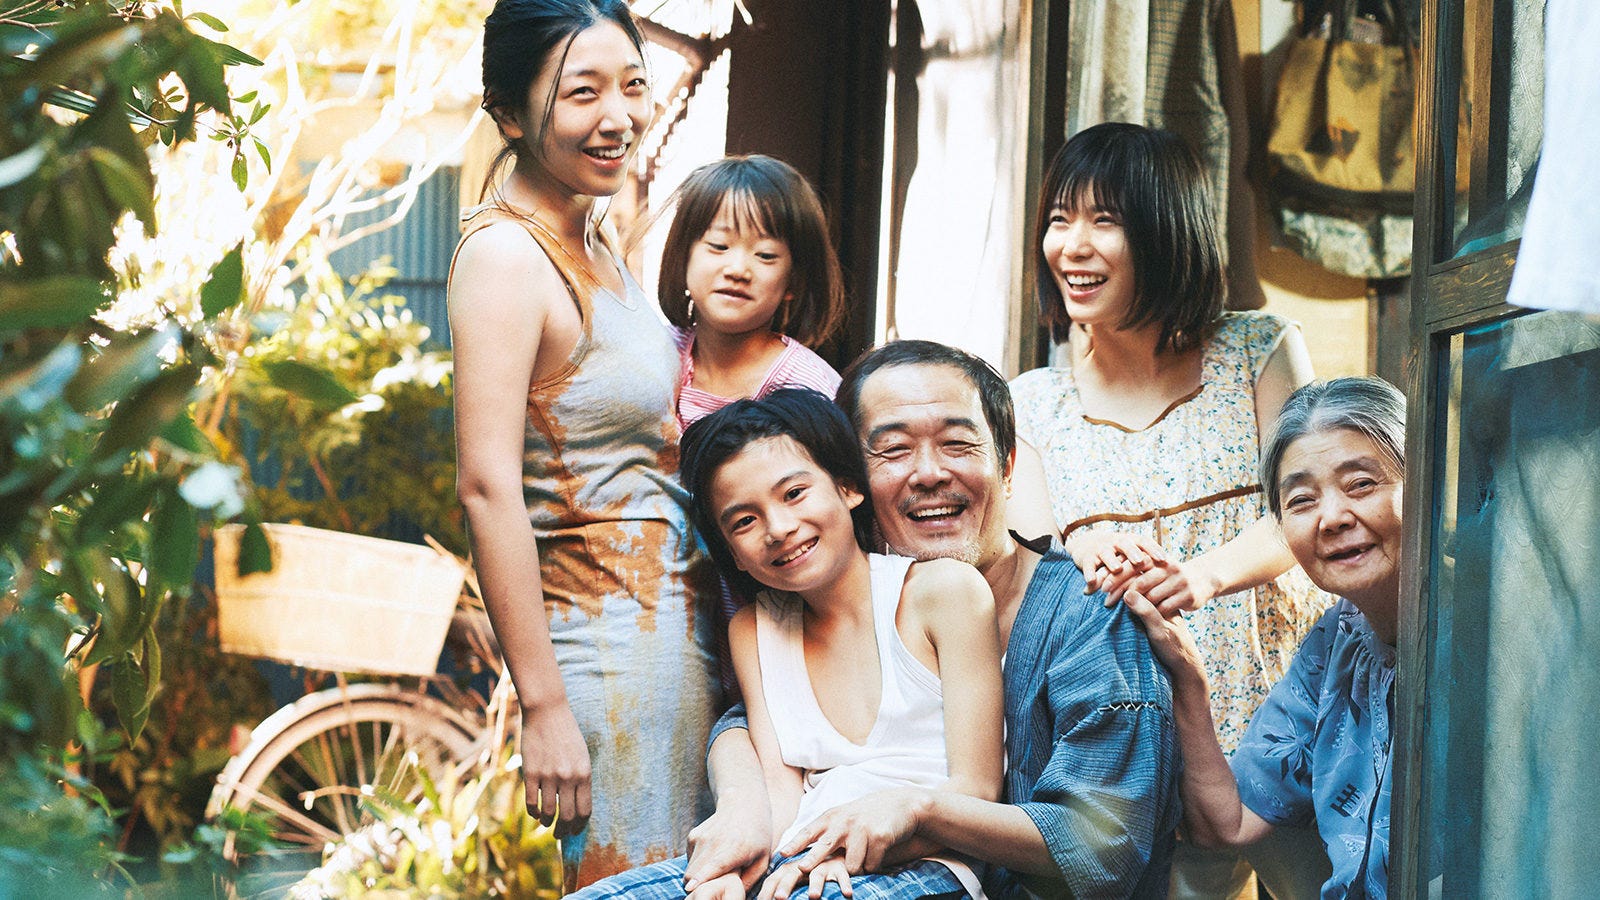 Shoplifters film about group that forms